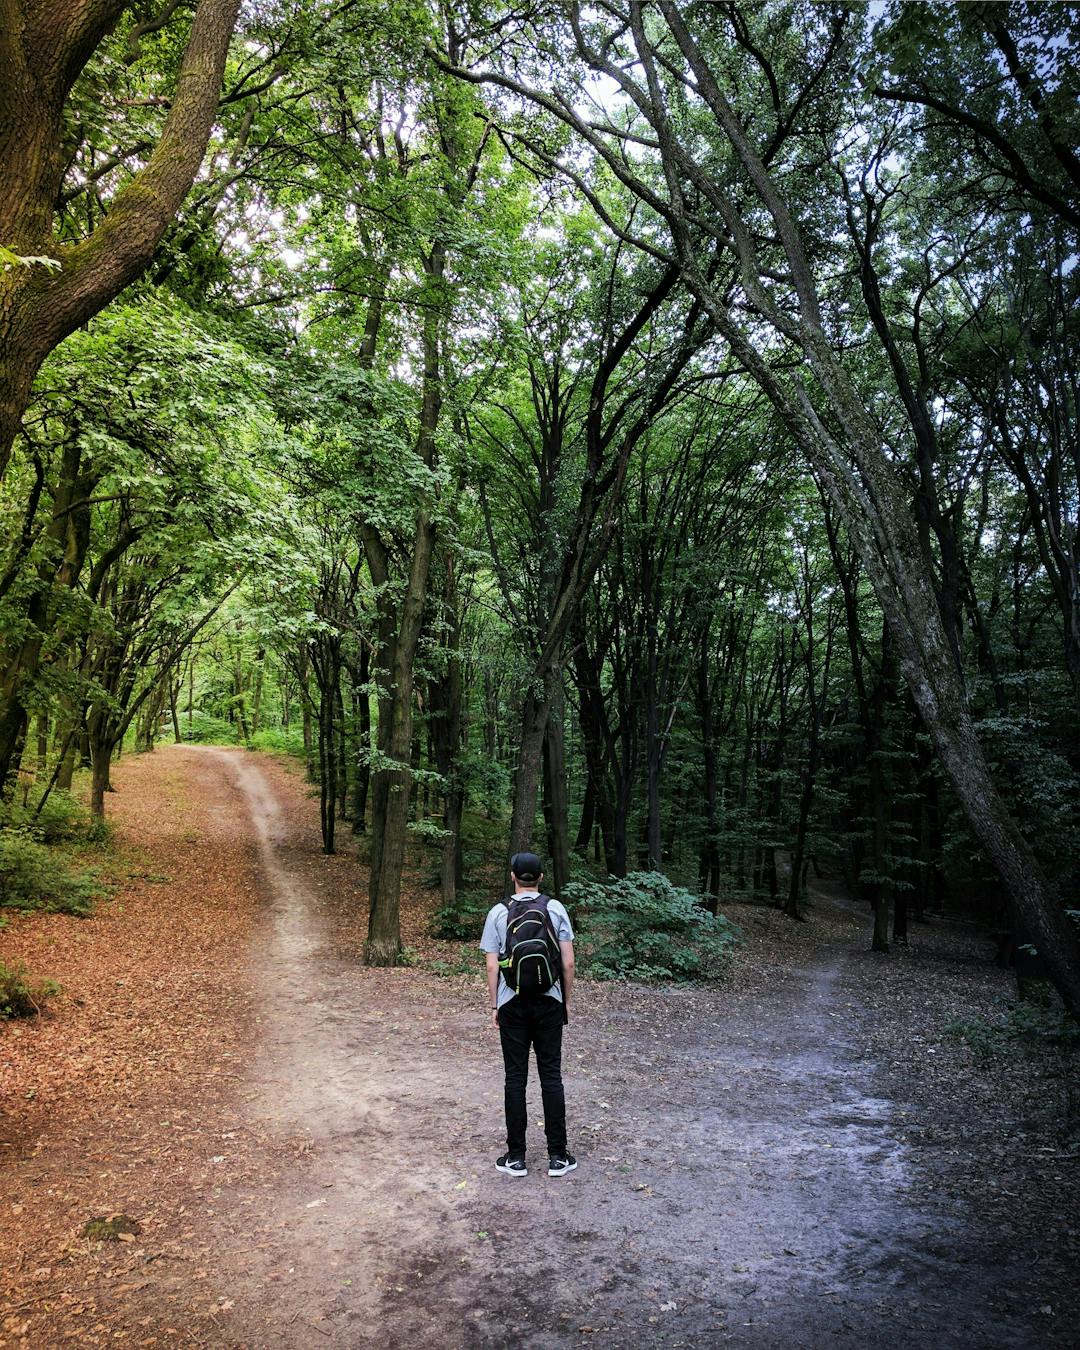 Person stands at a fork in a forest path, deciding between a well-lit, grassy left trail and a darker, more enclosed right trail. The surrounding forest is dense with tall trees.